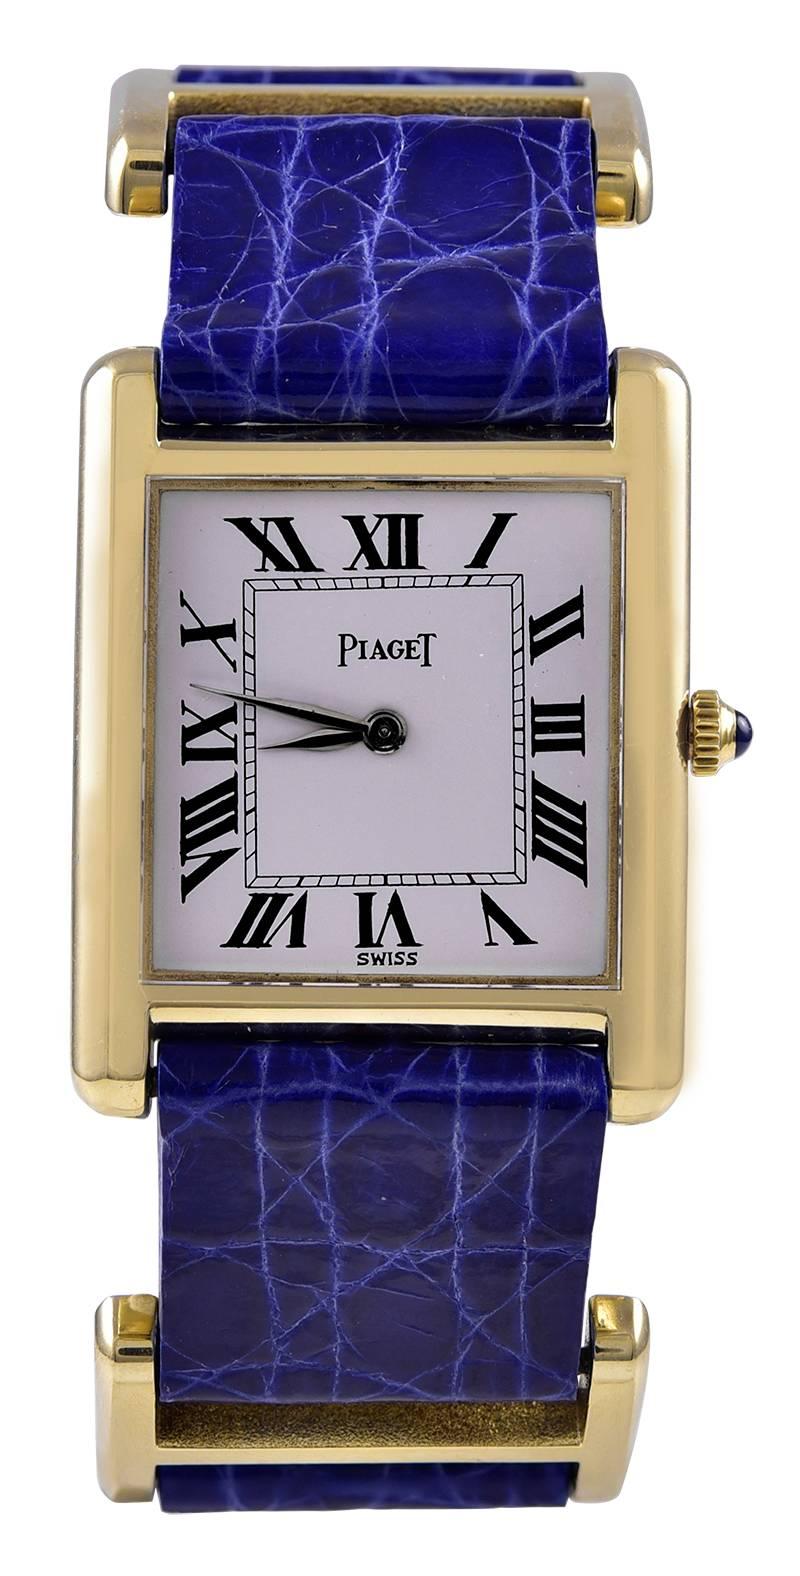 Slim and sleek true tank watch.  Made and signed by PIAGET.  18K yellow gold, with double bar bands between the watch and the buckle.  Mechanical movement.  Roman numerals. Navy crocodile band.  Streamlined to the wrist; a fabulous wrap-around look.